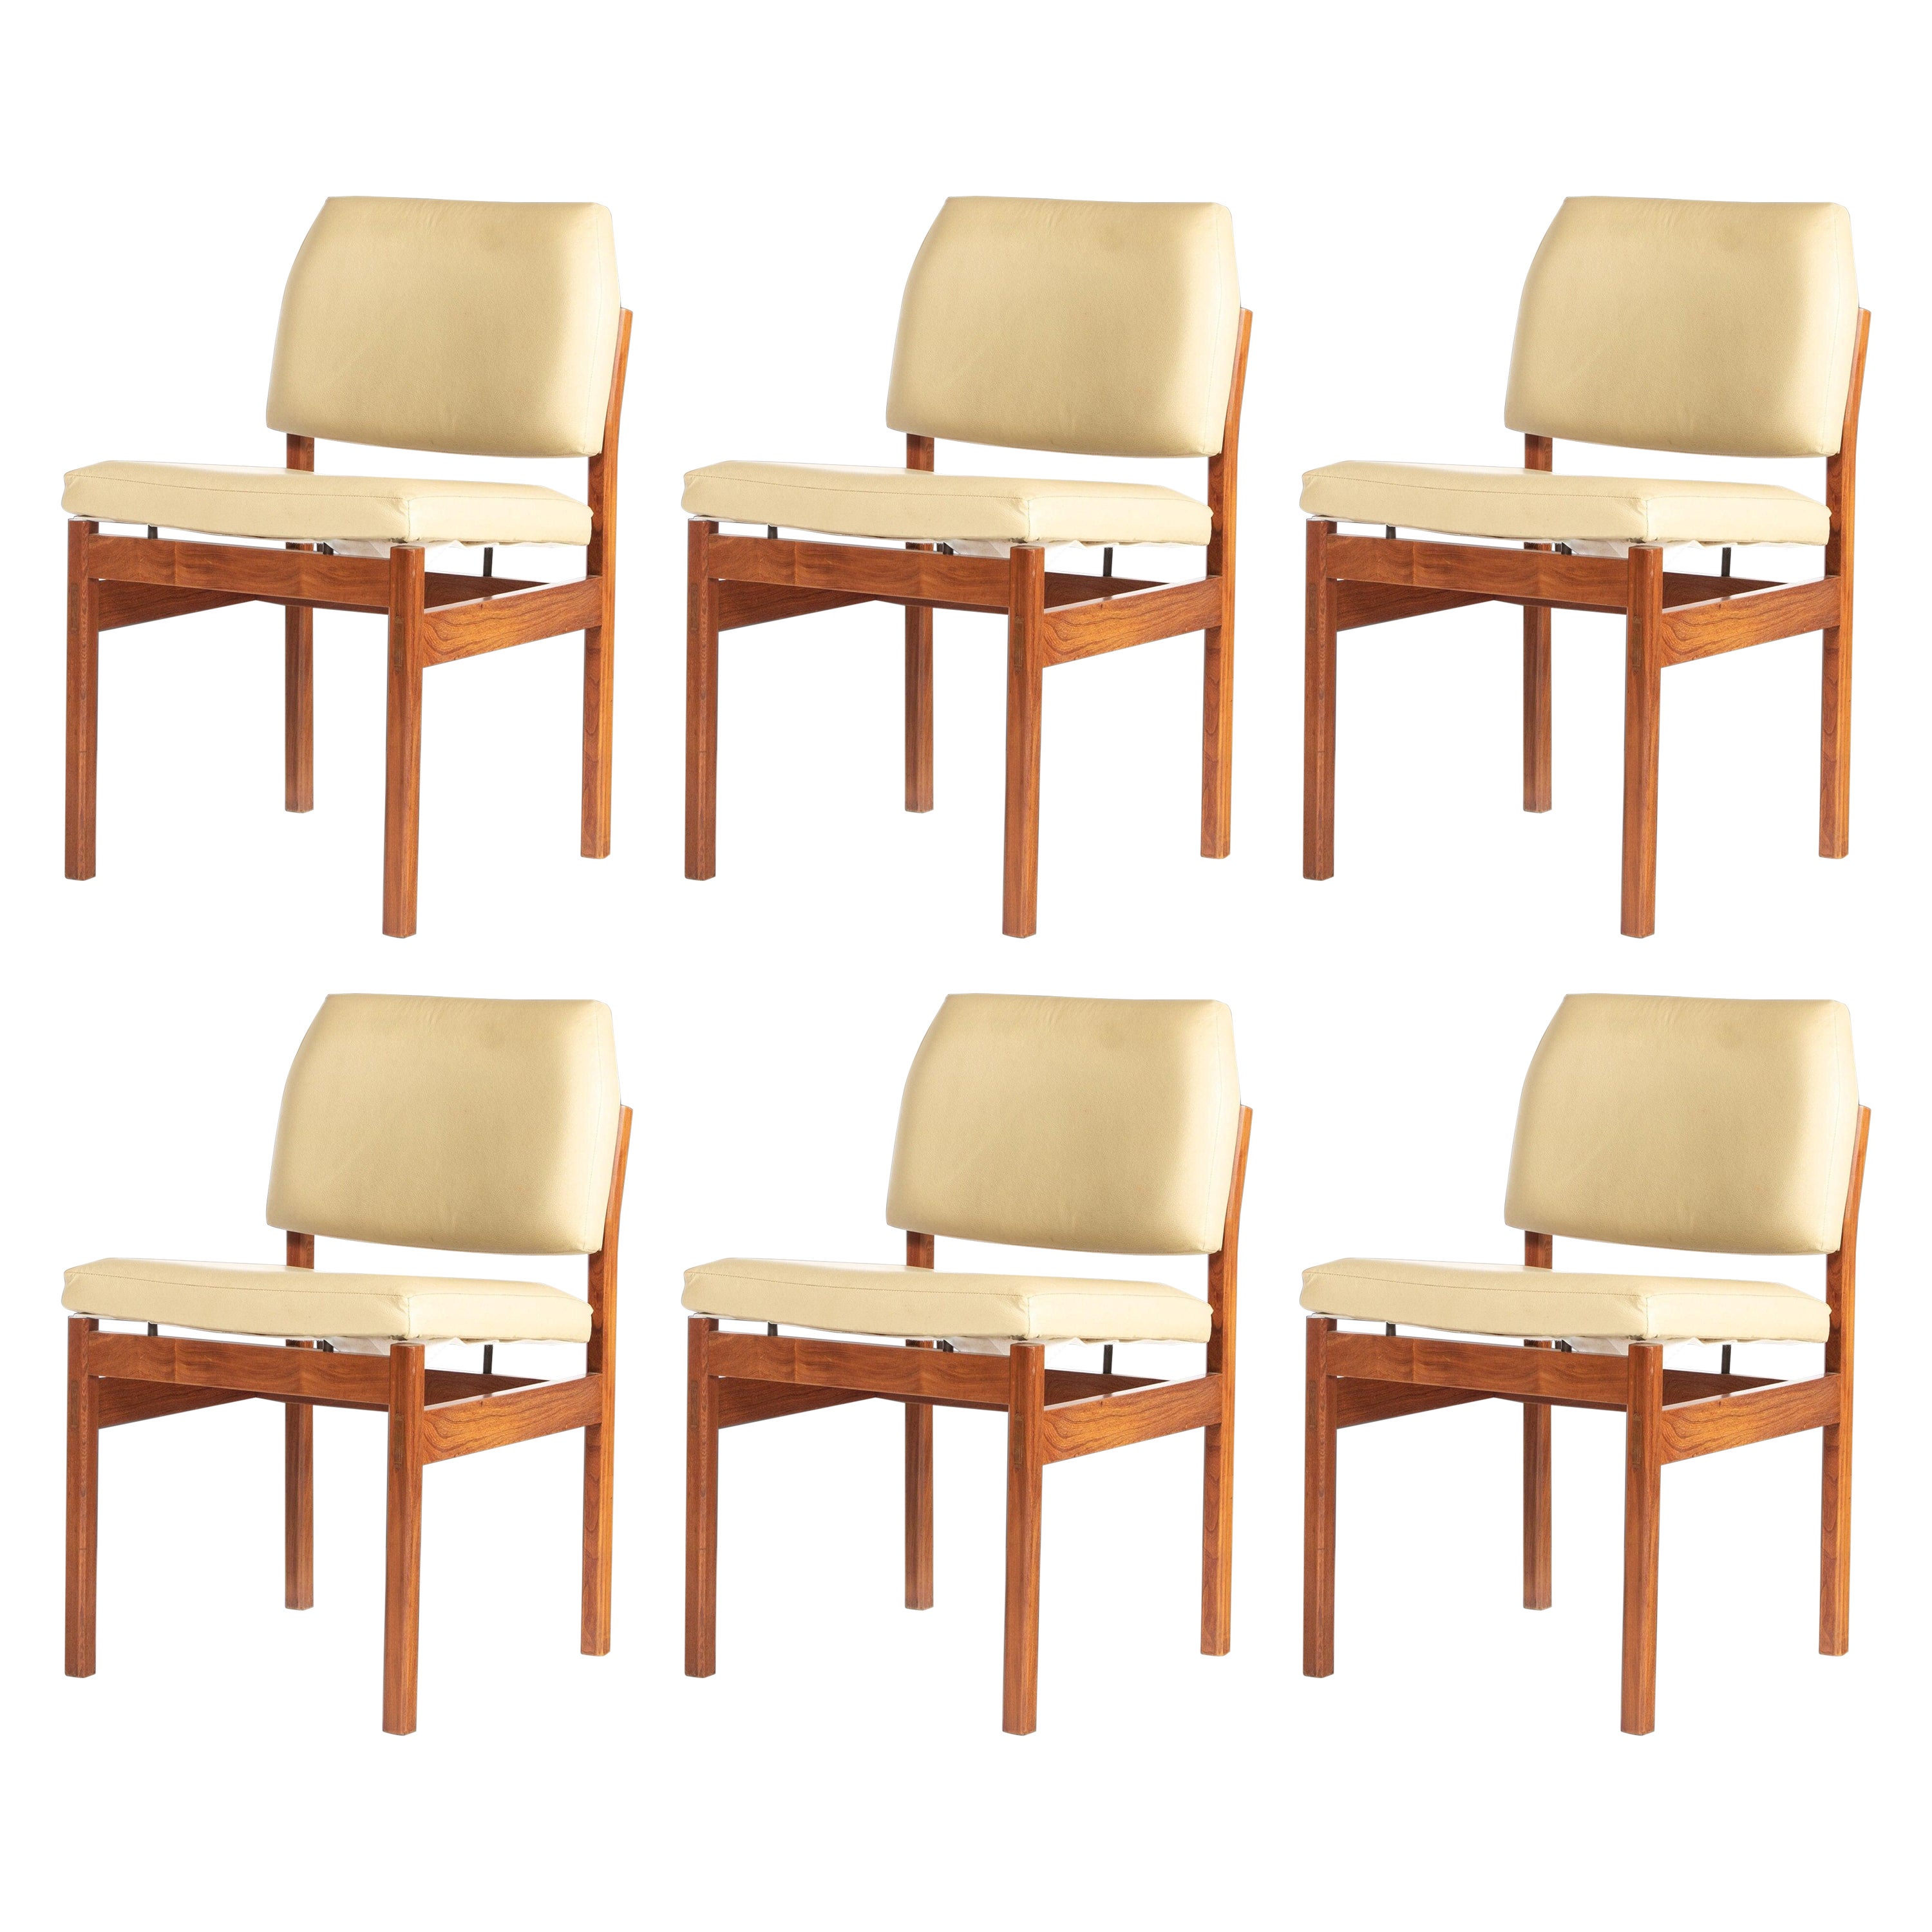 Set of Six (6) Walnut Dining Chairs in the Manner of Jens Risom, USA, c. 1960s